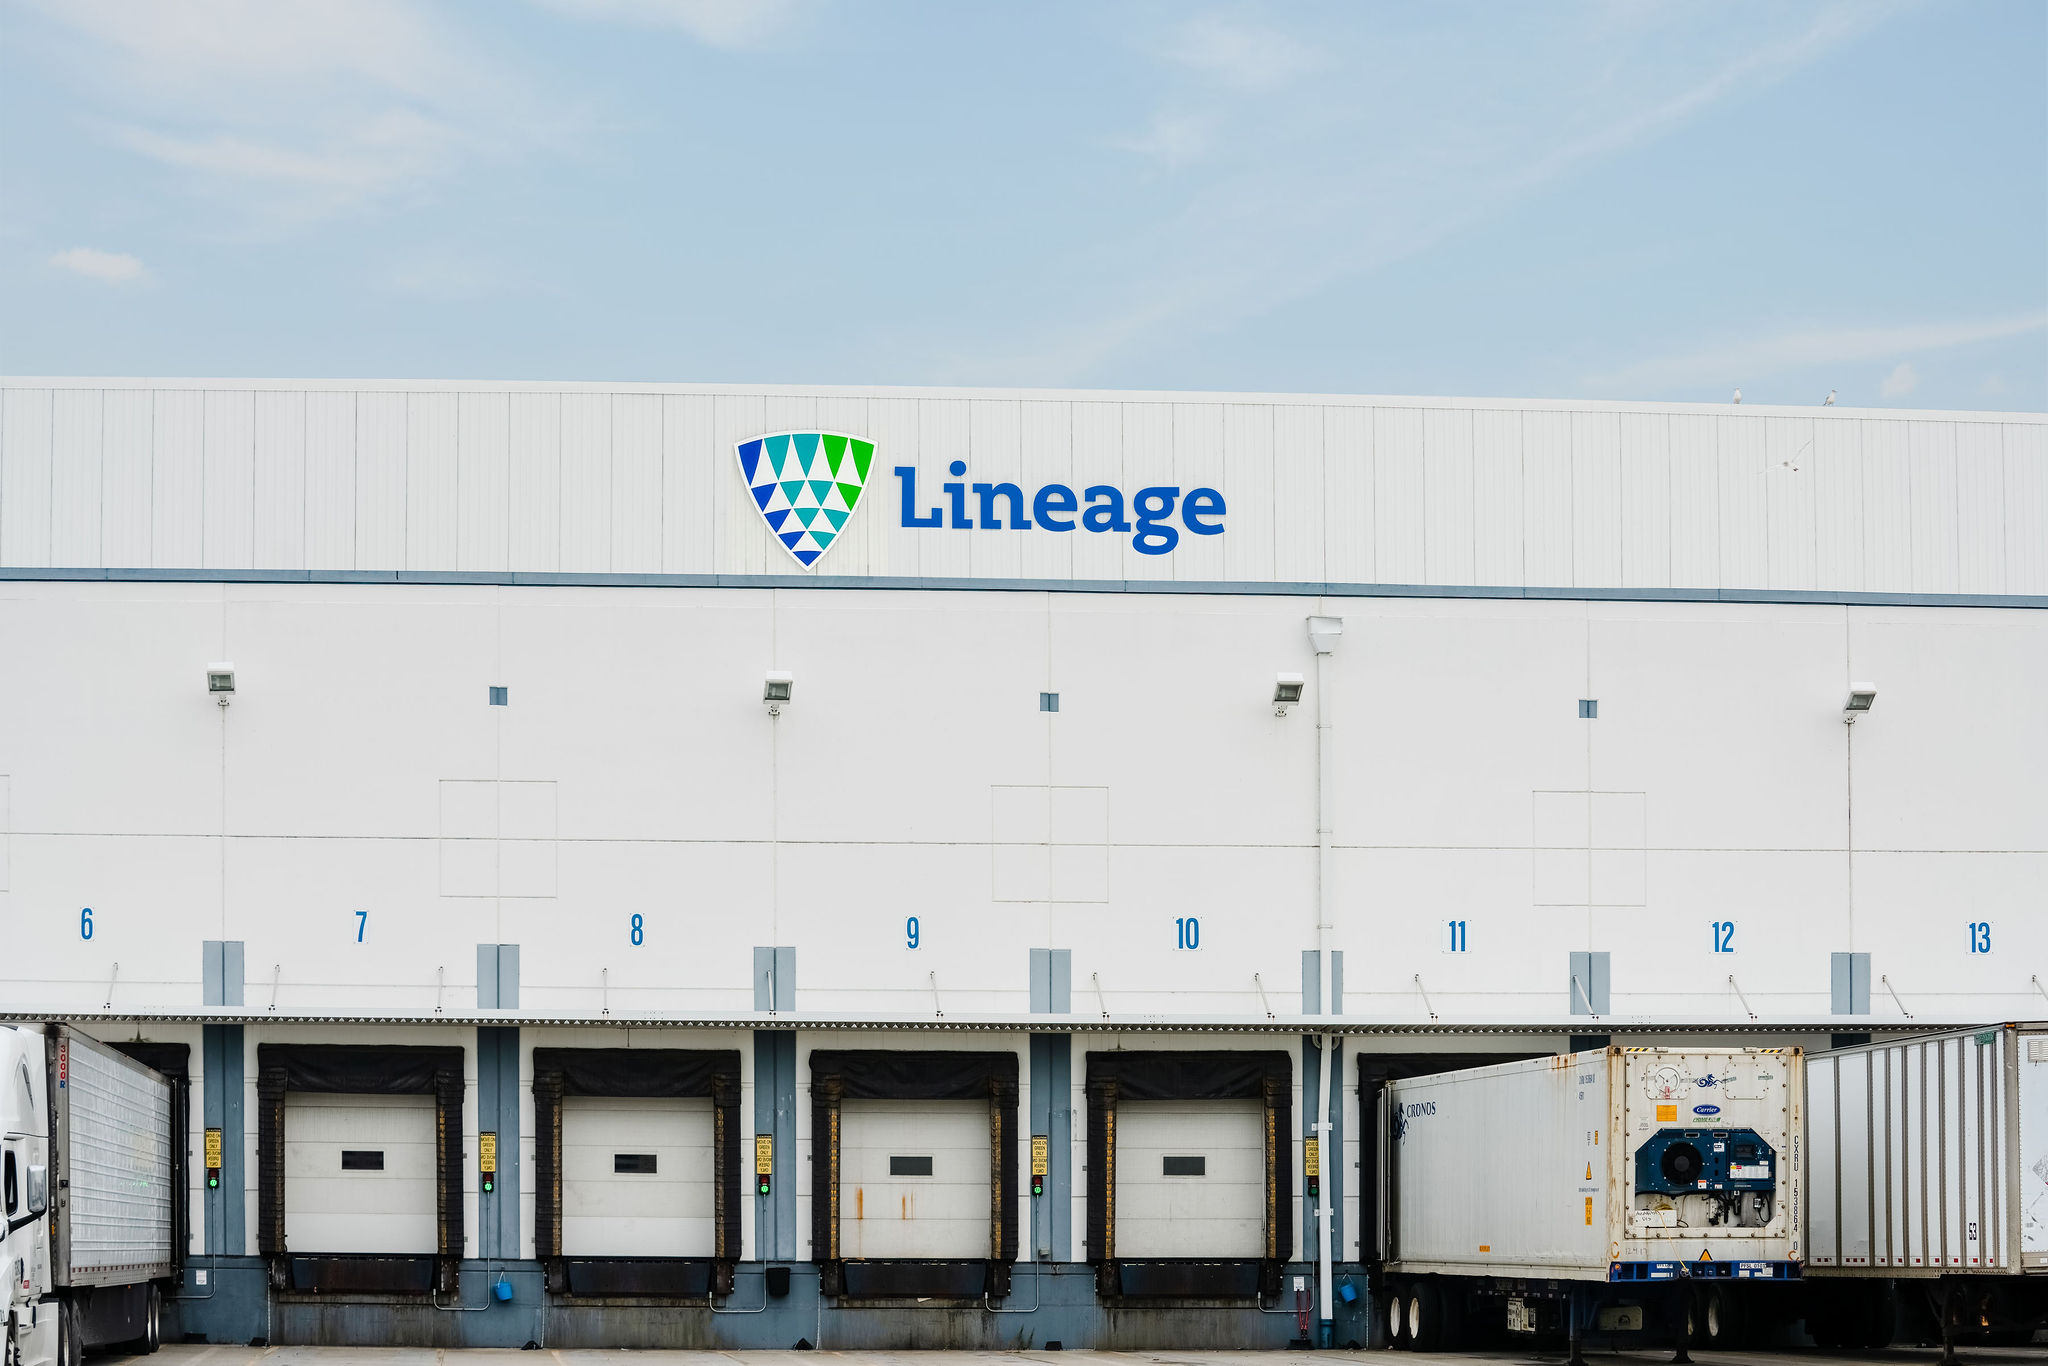 Exterior of Lineage warehouse loading docks with trucks